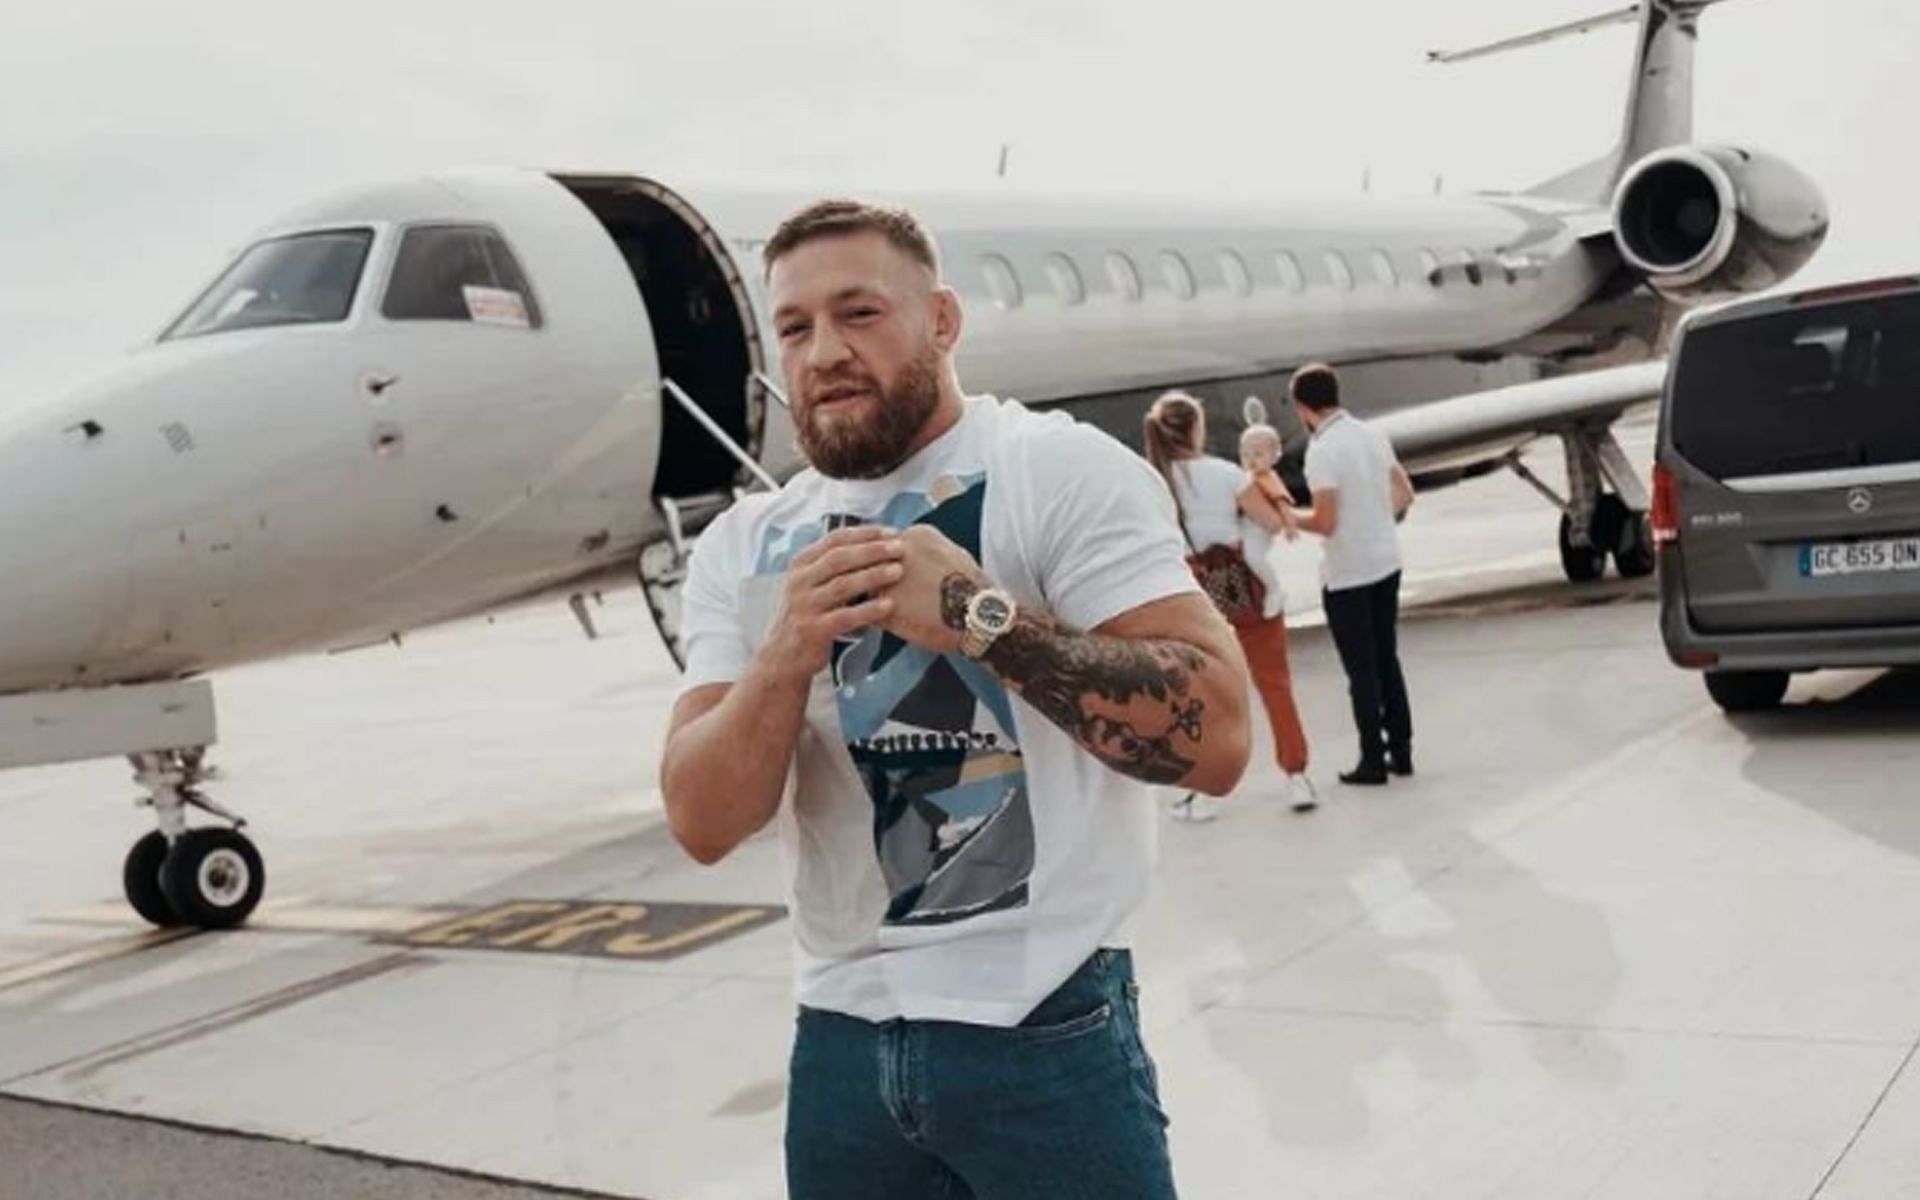 Conor McGregor is credited for expanding MMA and the UFC